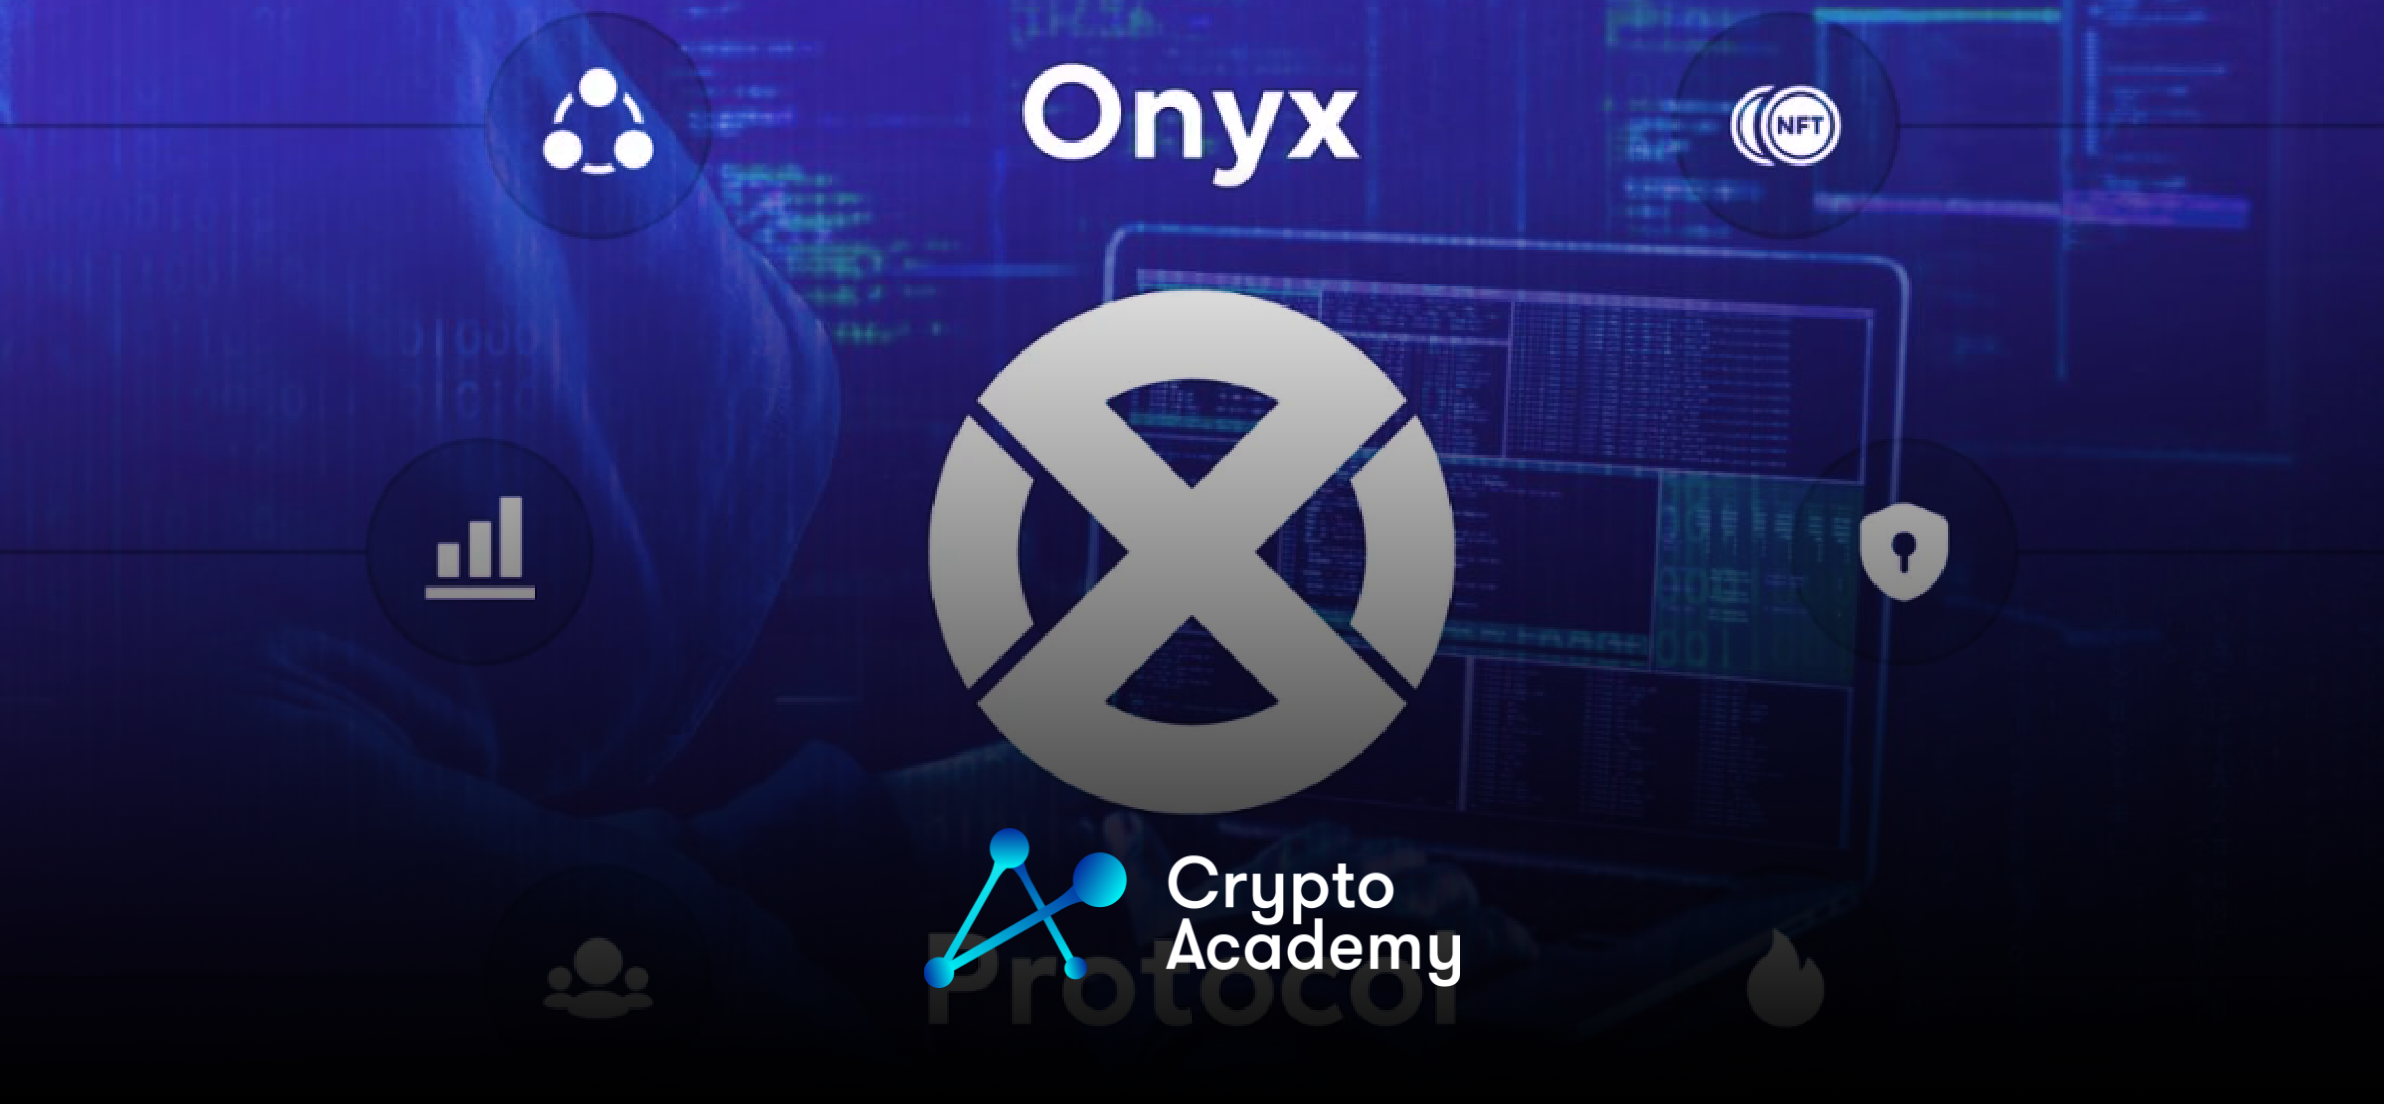 Onyx Protocol Lost $2.1 Million In a Latest Exploit